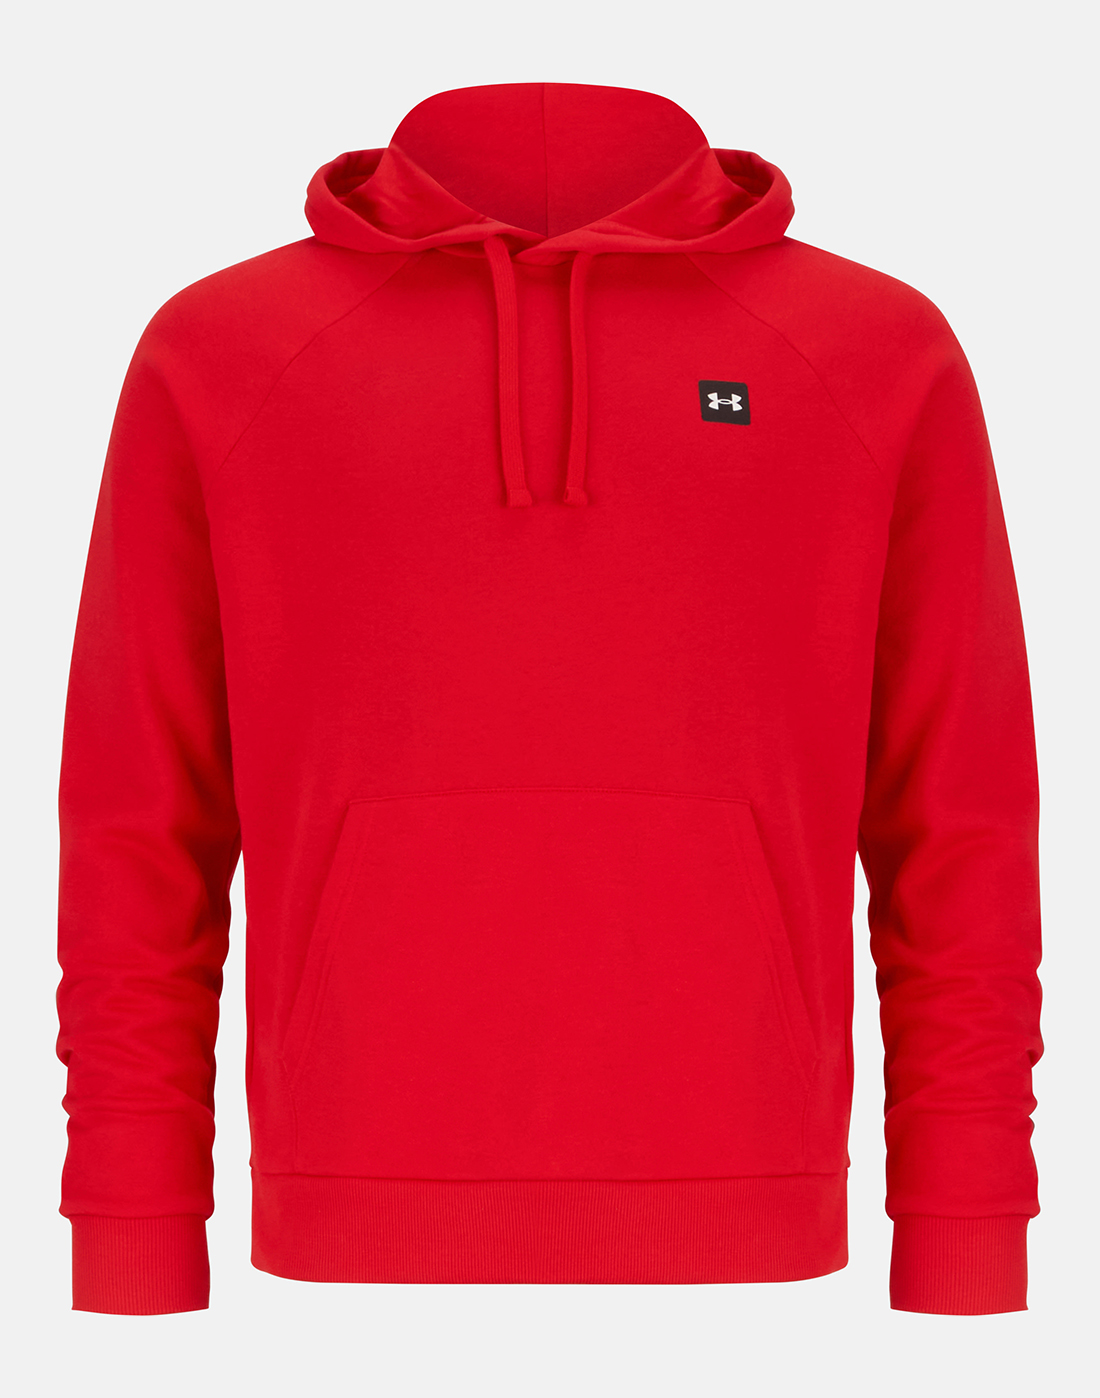 Under Armour Mens Rival Fleece Hoodie - Red | Life Style Sports IE